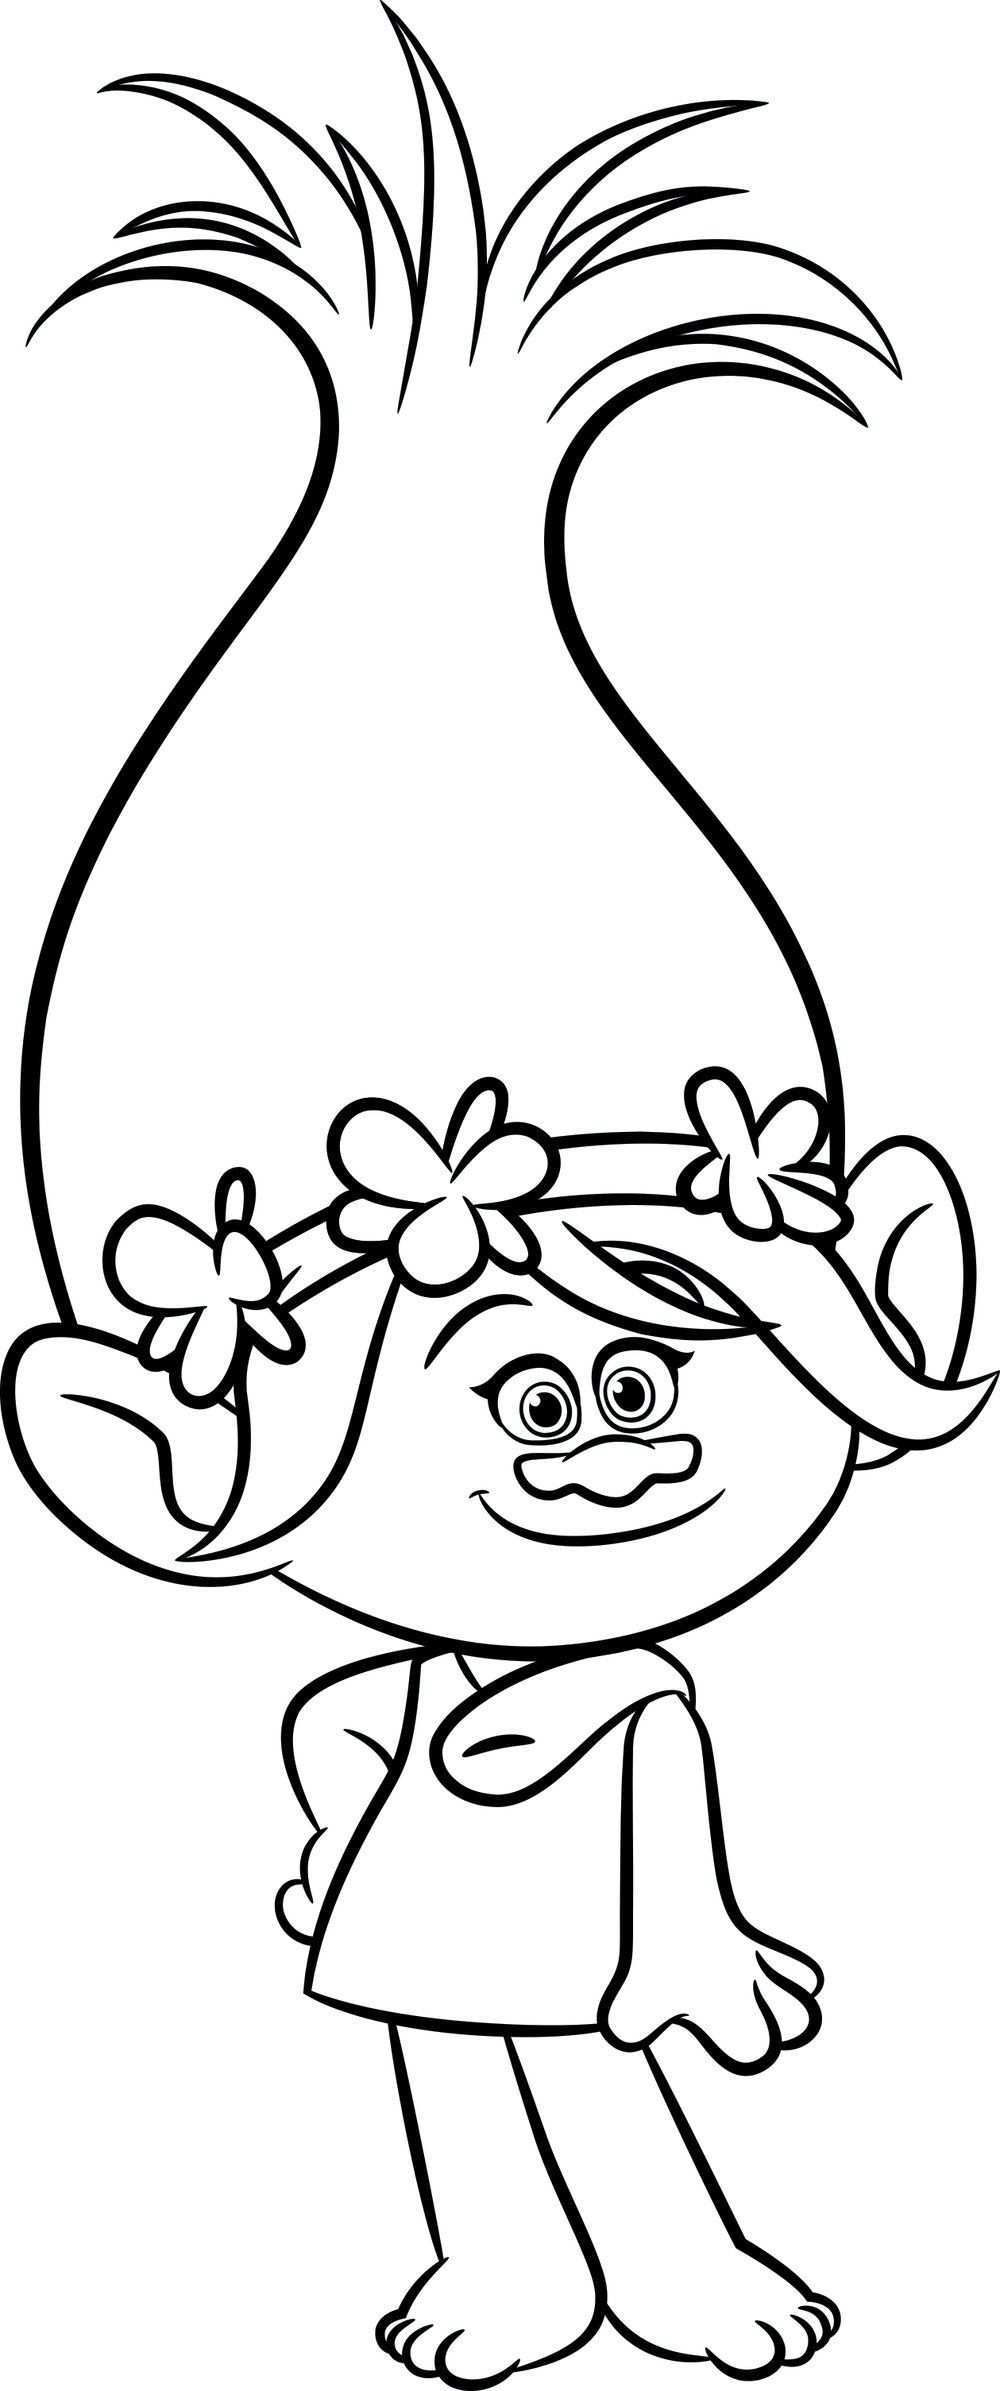 Trolls Activitysheet Coloringpage1 Jpg Poppy Coloring Page Frozen Coloring Pages Disn